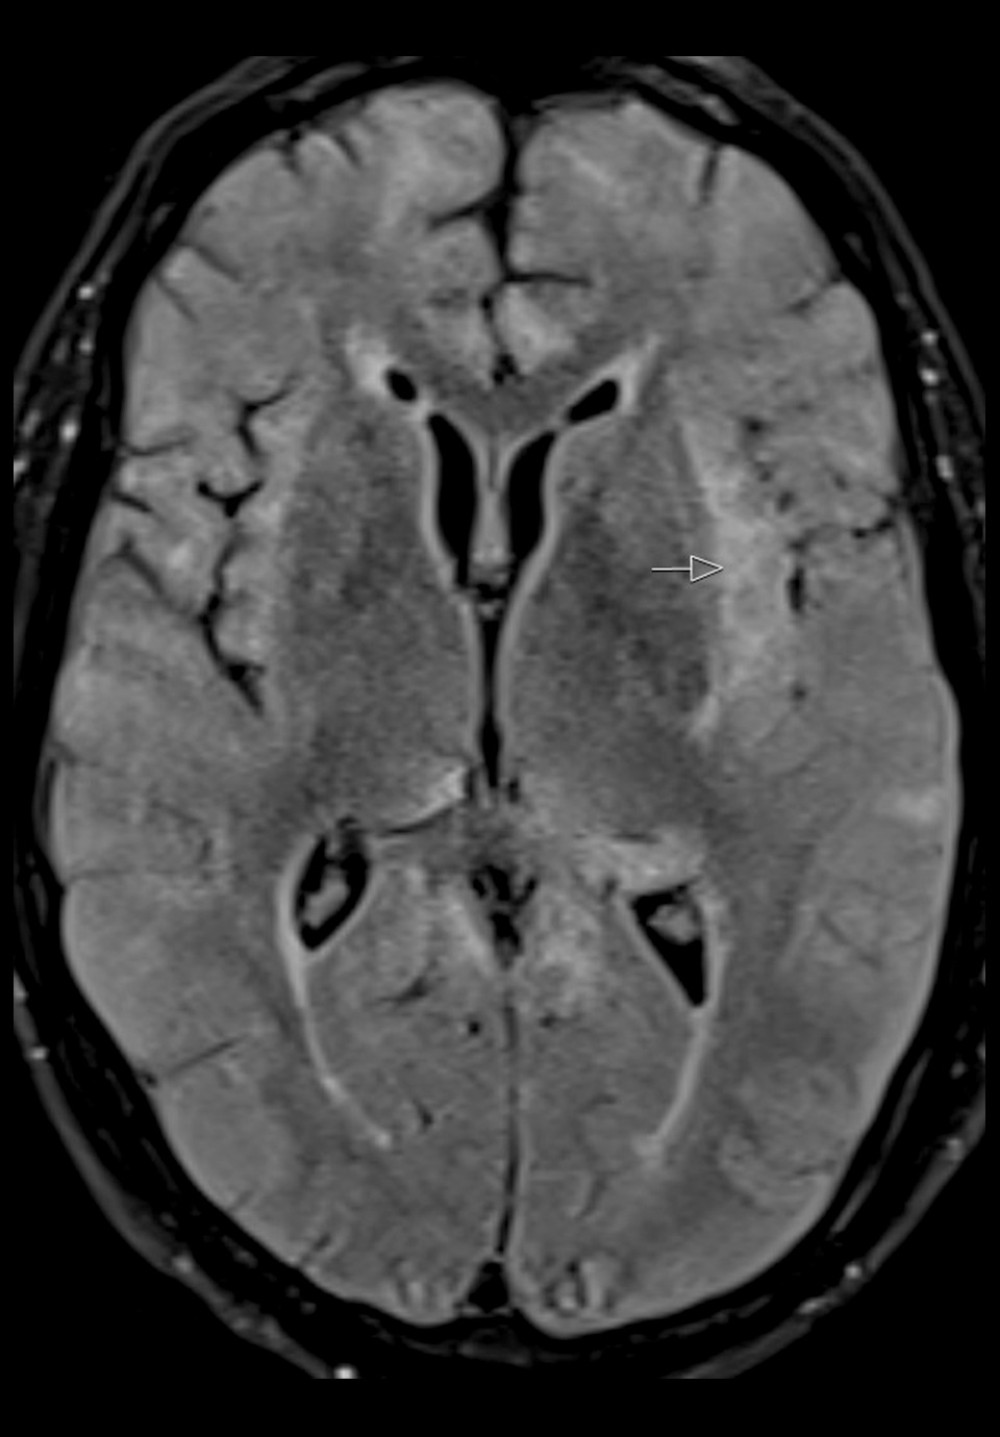 First axial FLAIR-weighted MRI showing hyperintense signal areas along the left insular lobe (arrow). Similar but less prominent changes are seen in the right insular lobe. A hyperintense signal is seen in the cingulate gyrus, bilaterally, as well as in frontal poles, more intense on the right.